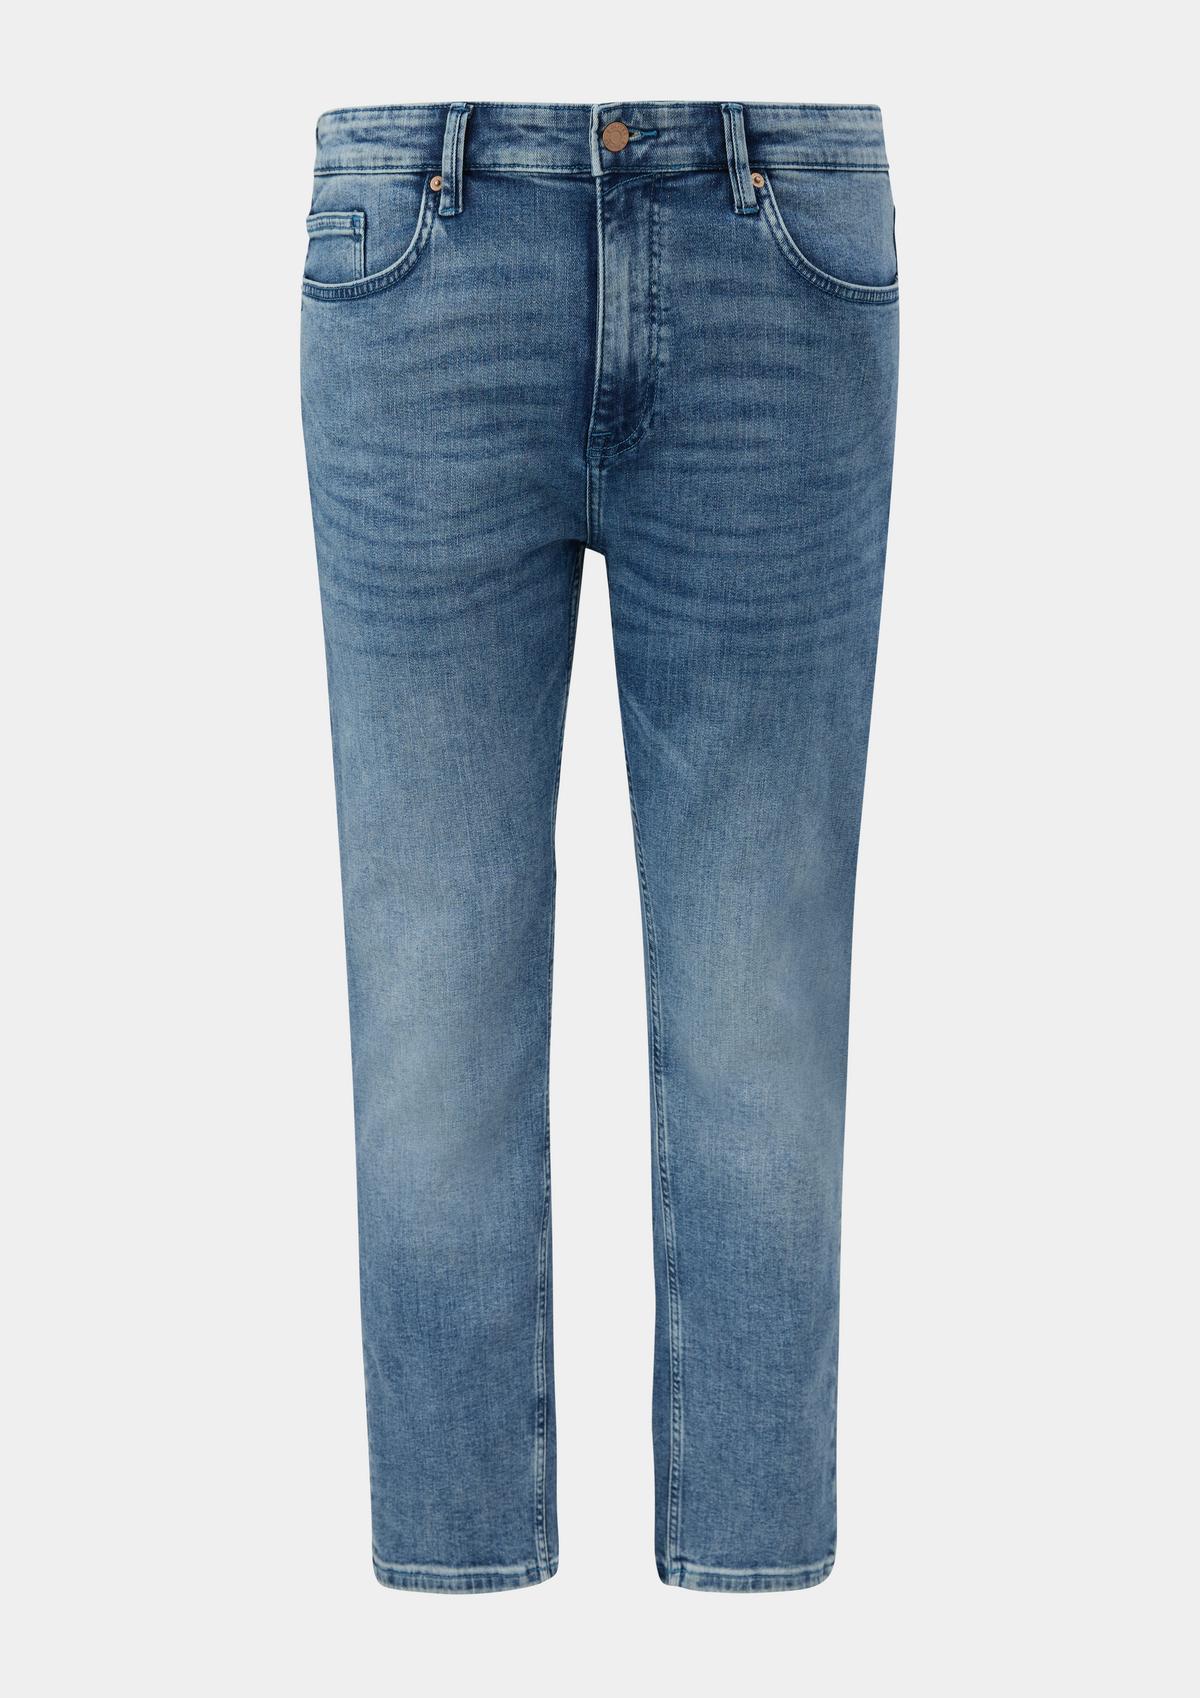 s.Oliver Casby jeans / relaxed fit / mid rise / straight leg